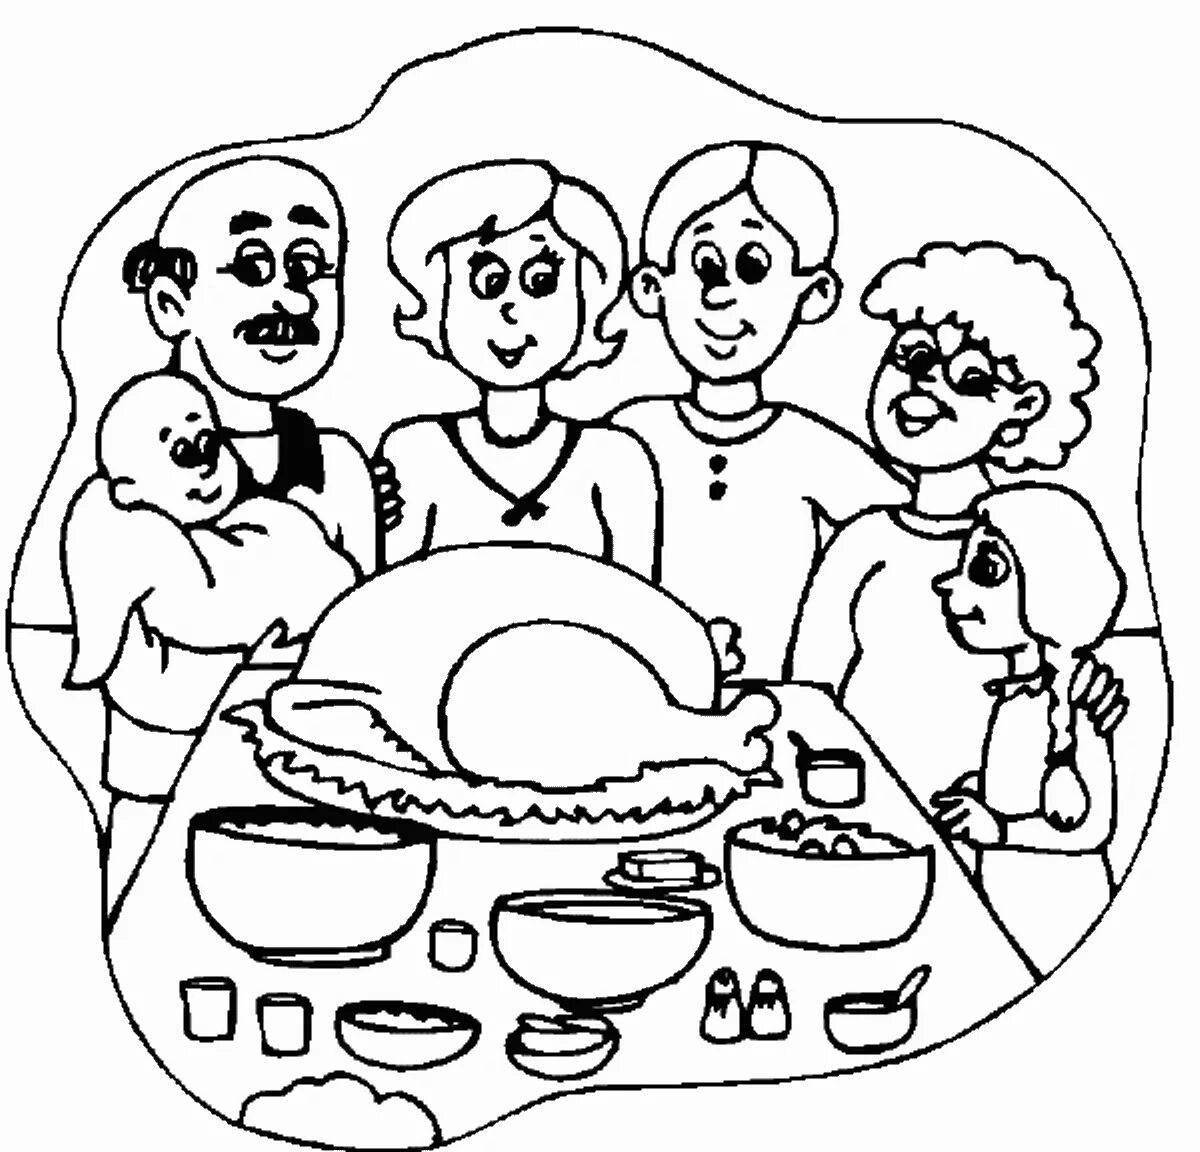 Coloring page joyful family at the table